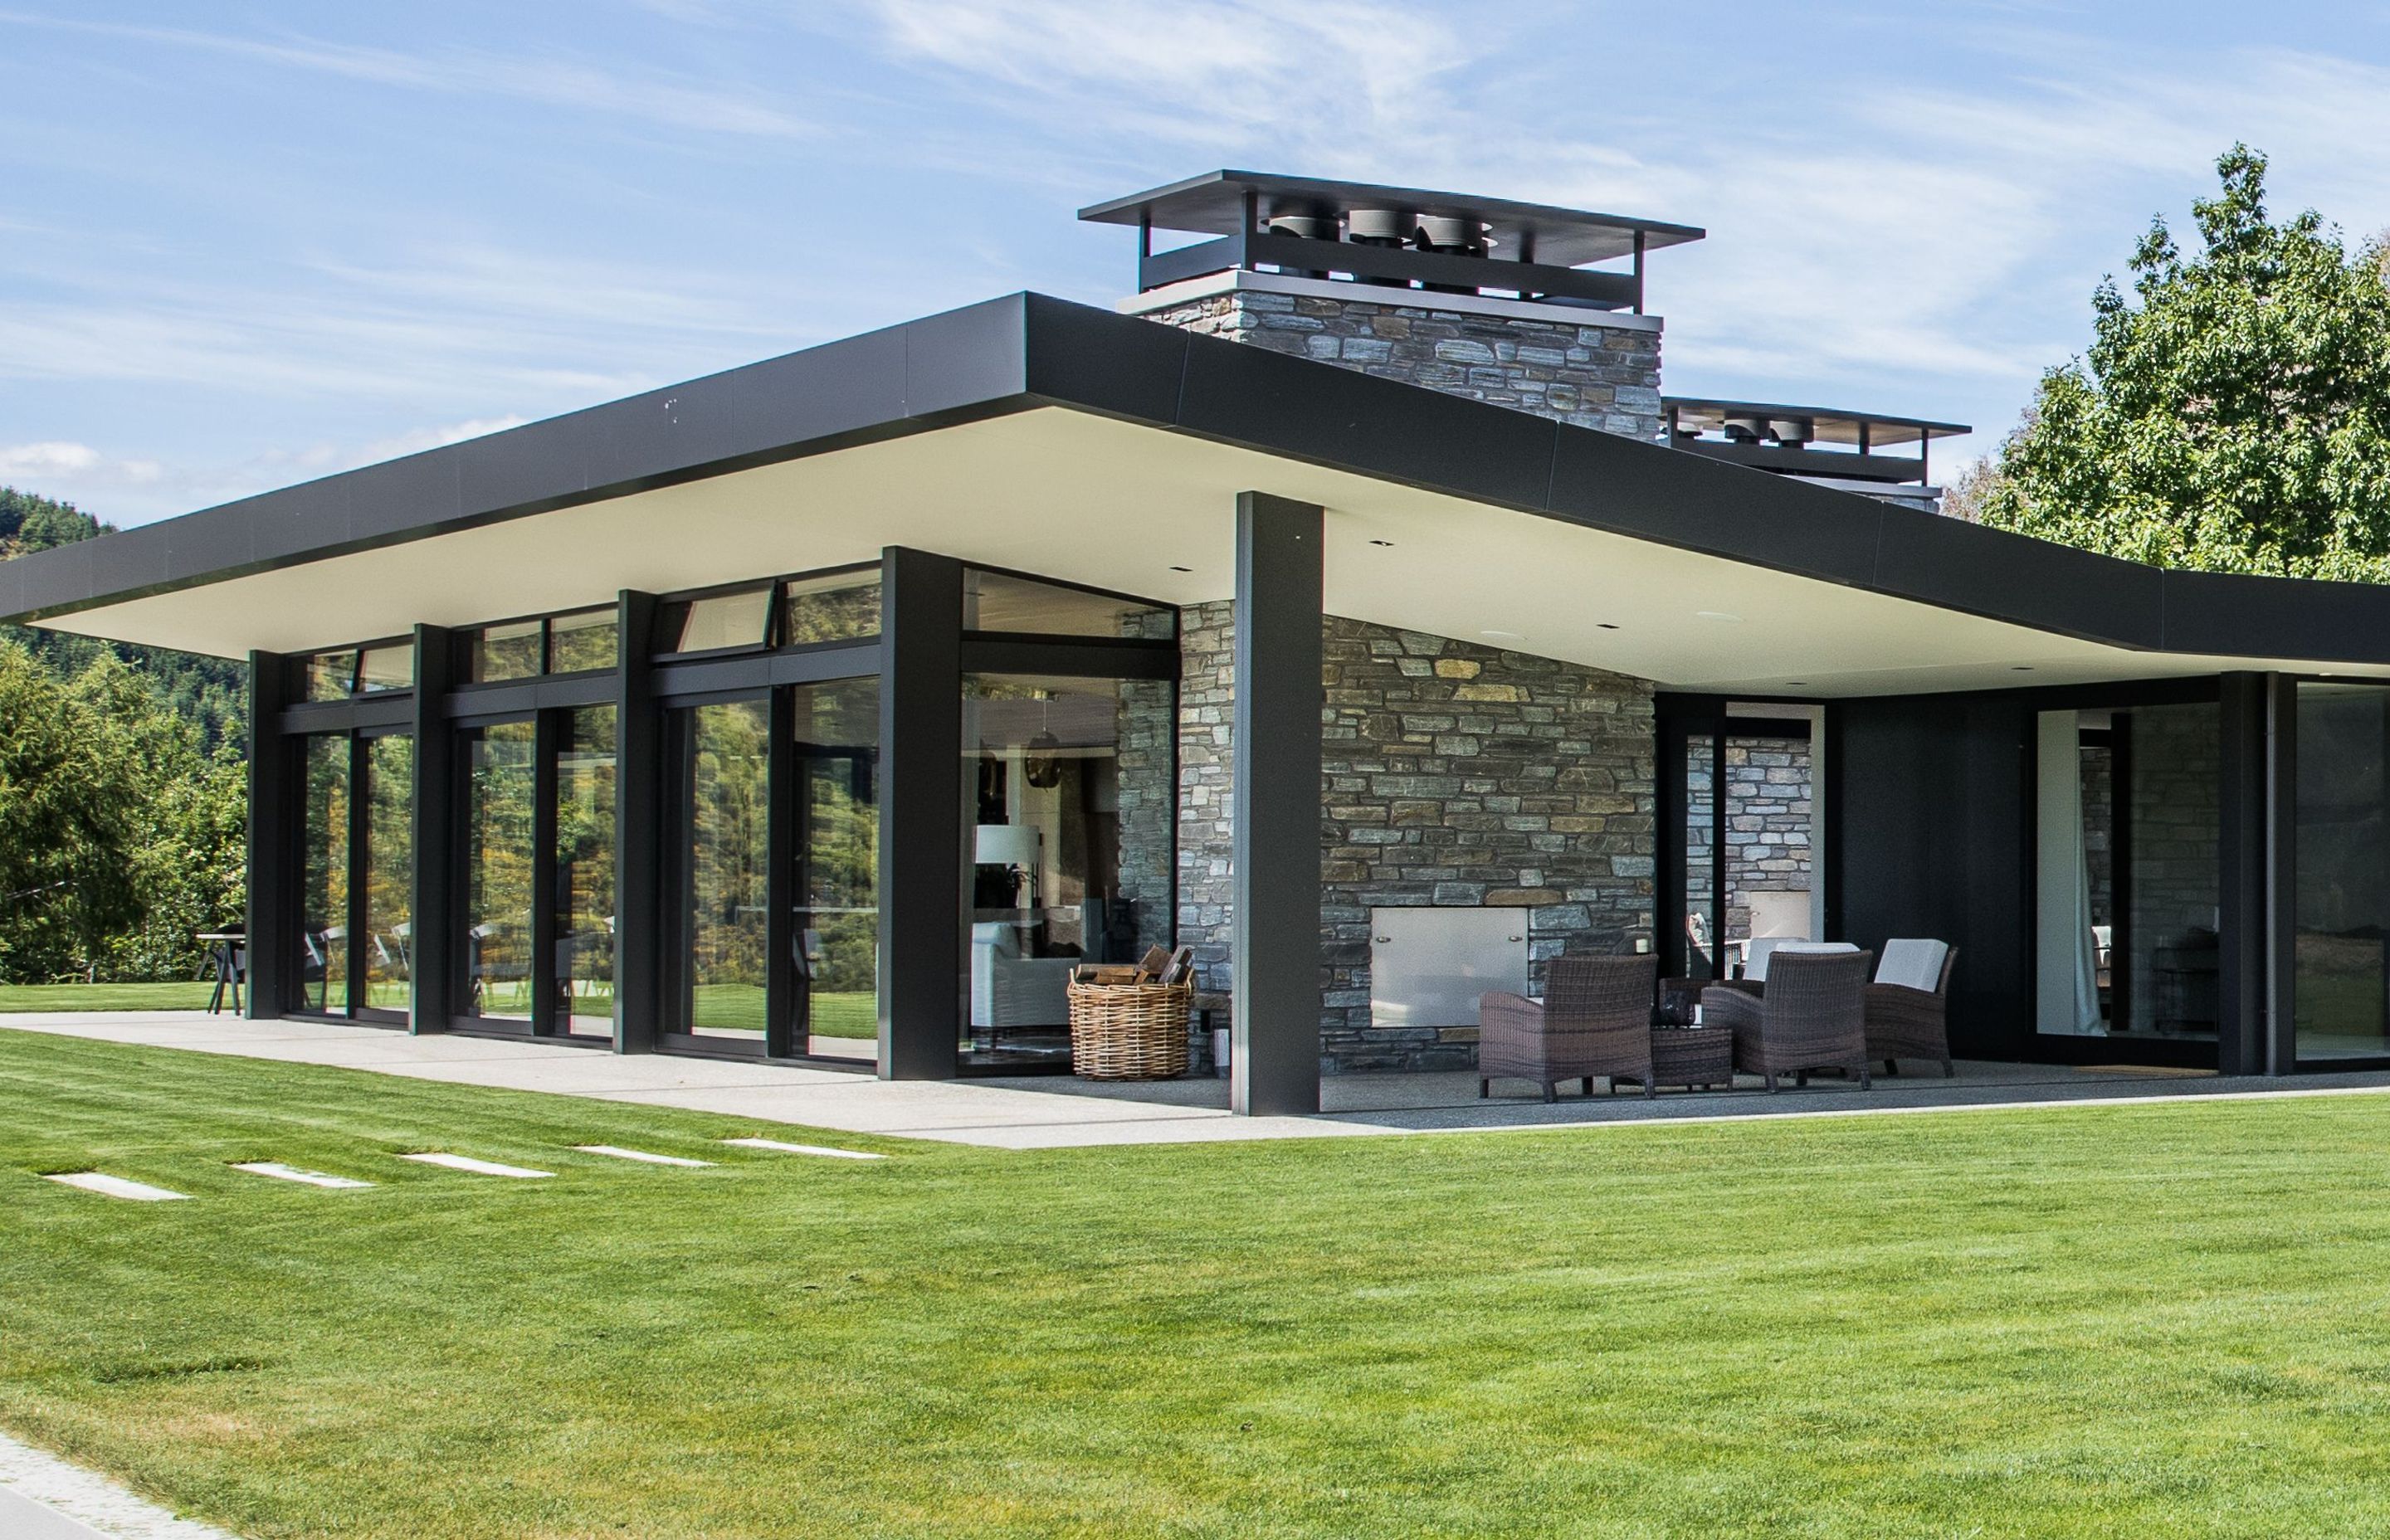 This home was clad with a blend of Wanaka Stone's Poolburn Grey and Cluden Grey stone.